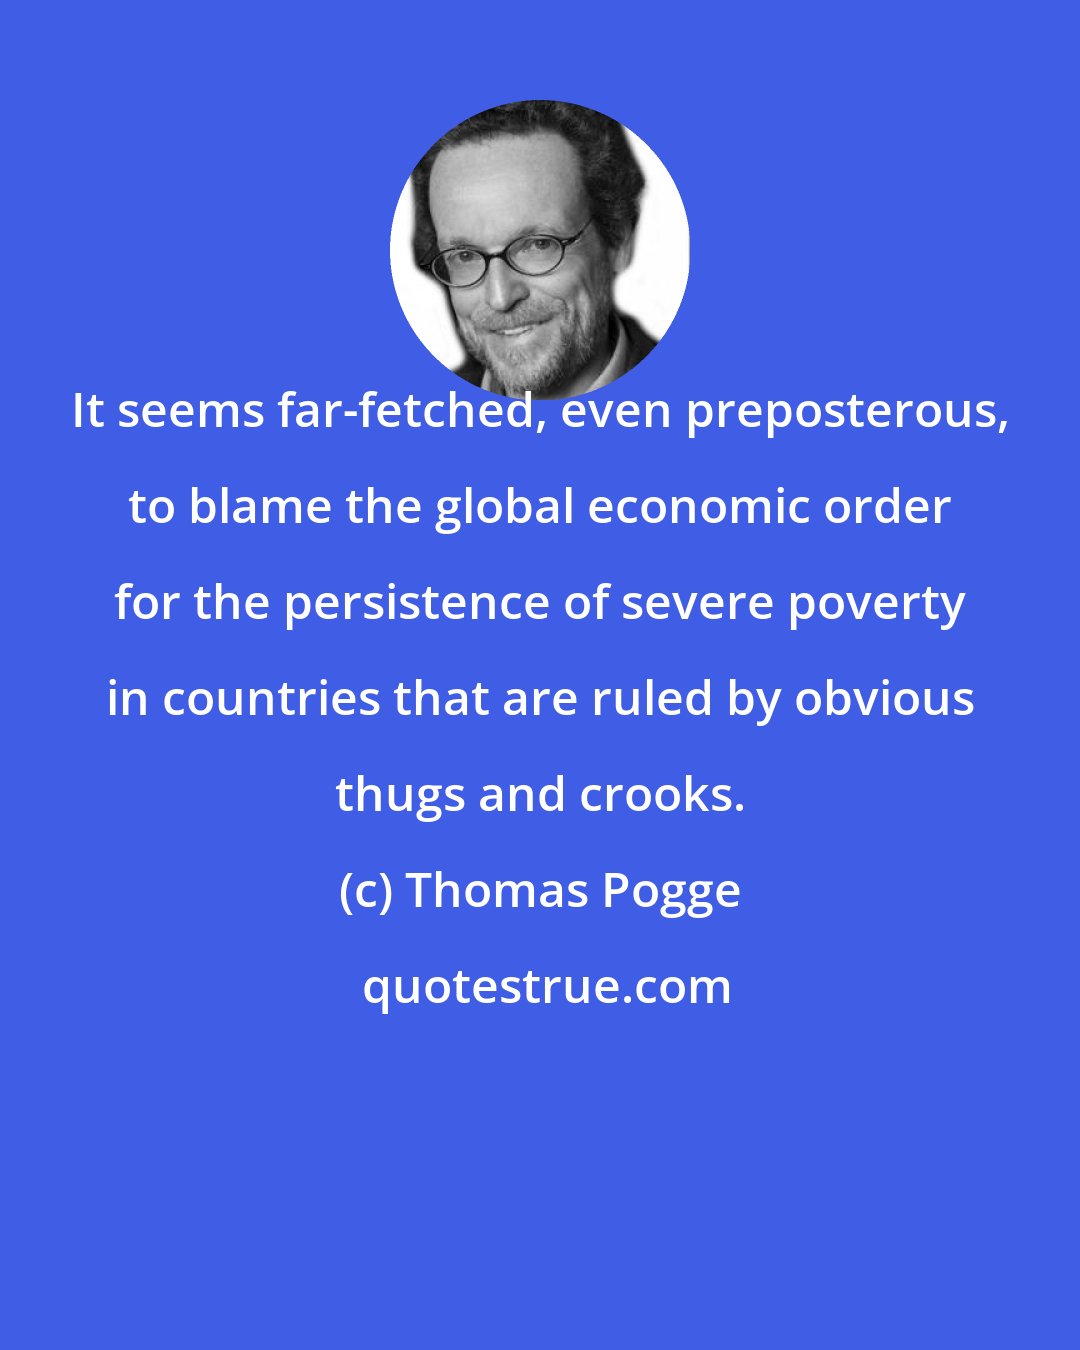 Thomas Pogge: It seems far-fetched, even preposterous, to blame the global economic order for the persistence of severe poverty in countries that are ruled by obvious thugs and crooks.